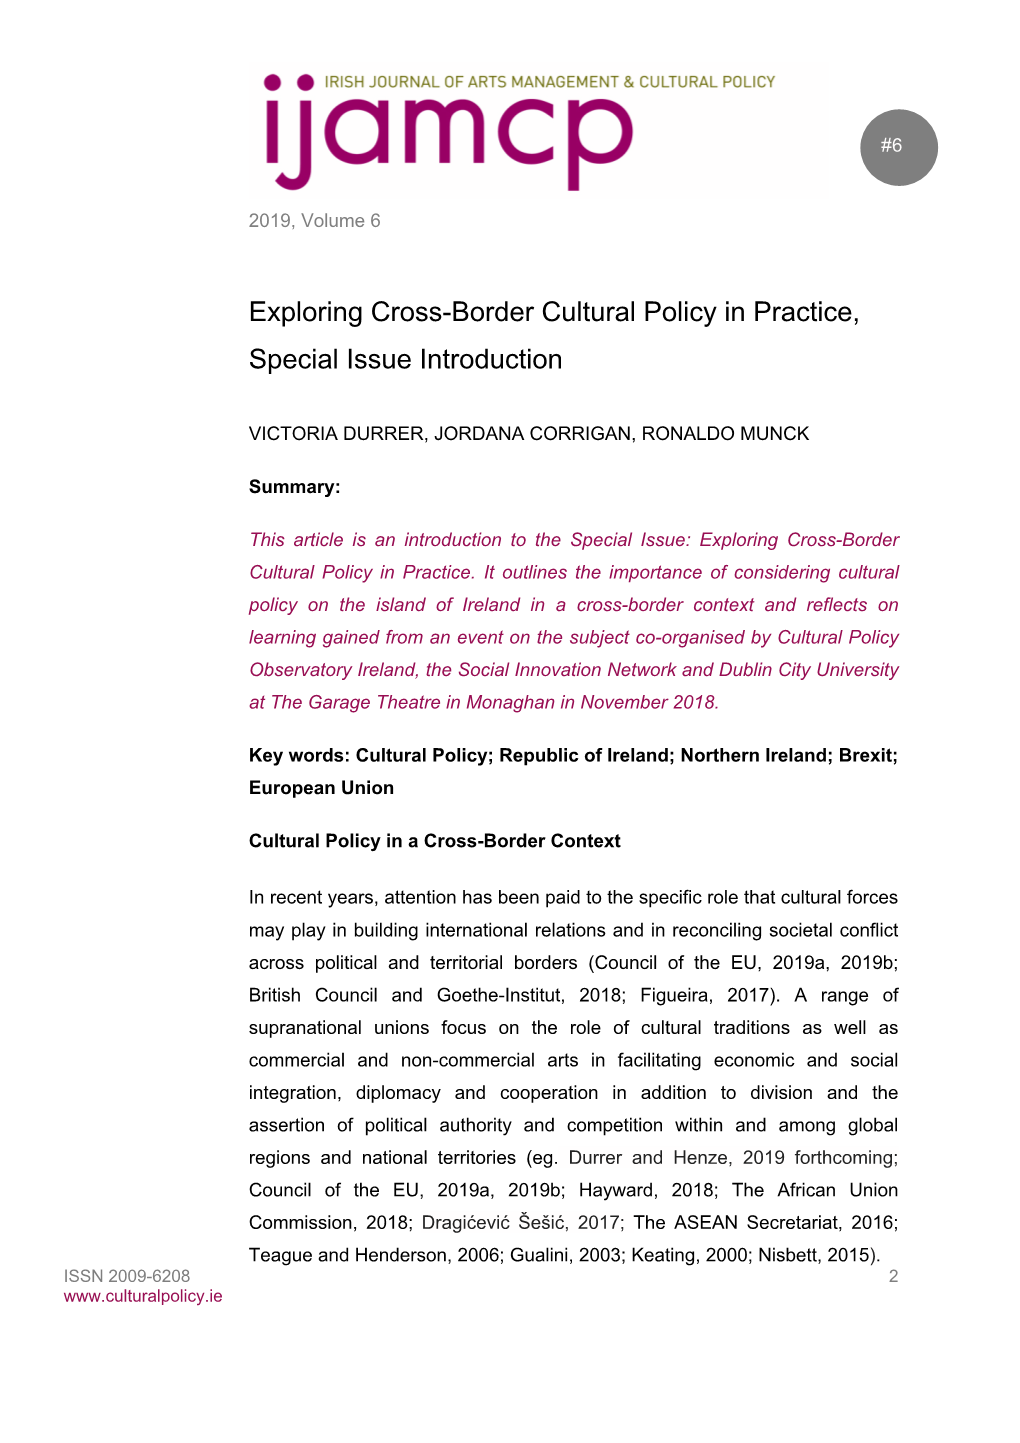 Exploring Cross-Border Cultural Policy in Practice, Special Issue Introduction